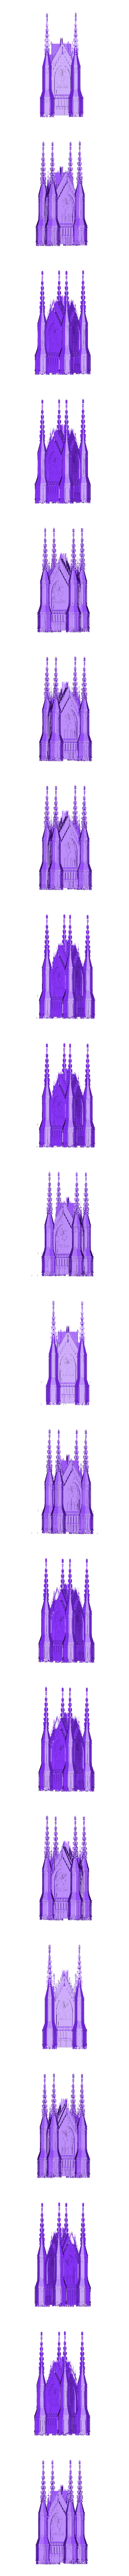 gothic tower uv.obj OBJ file Gothic Cathedral Angel Architecture Kit bash Extended・3D print object to download, aramar